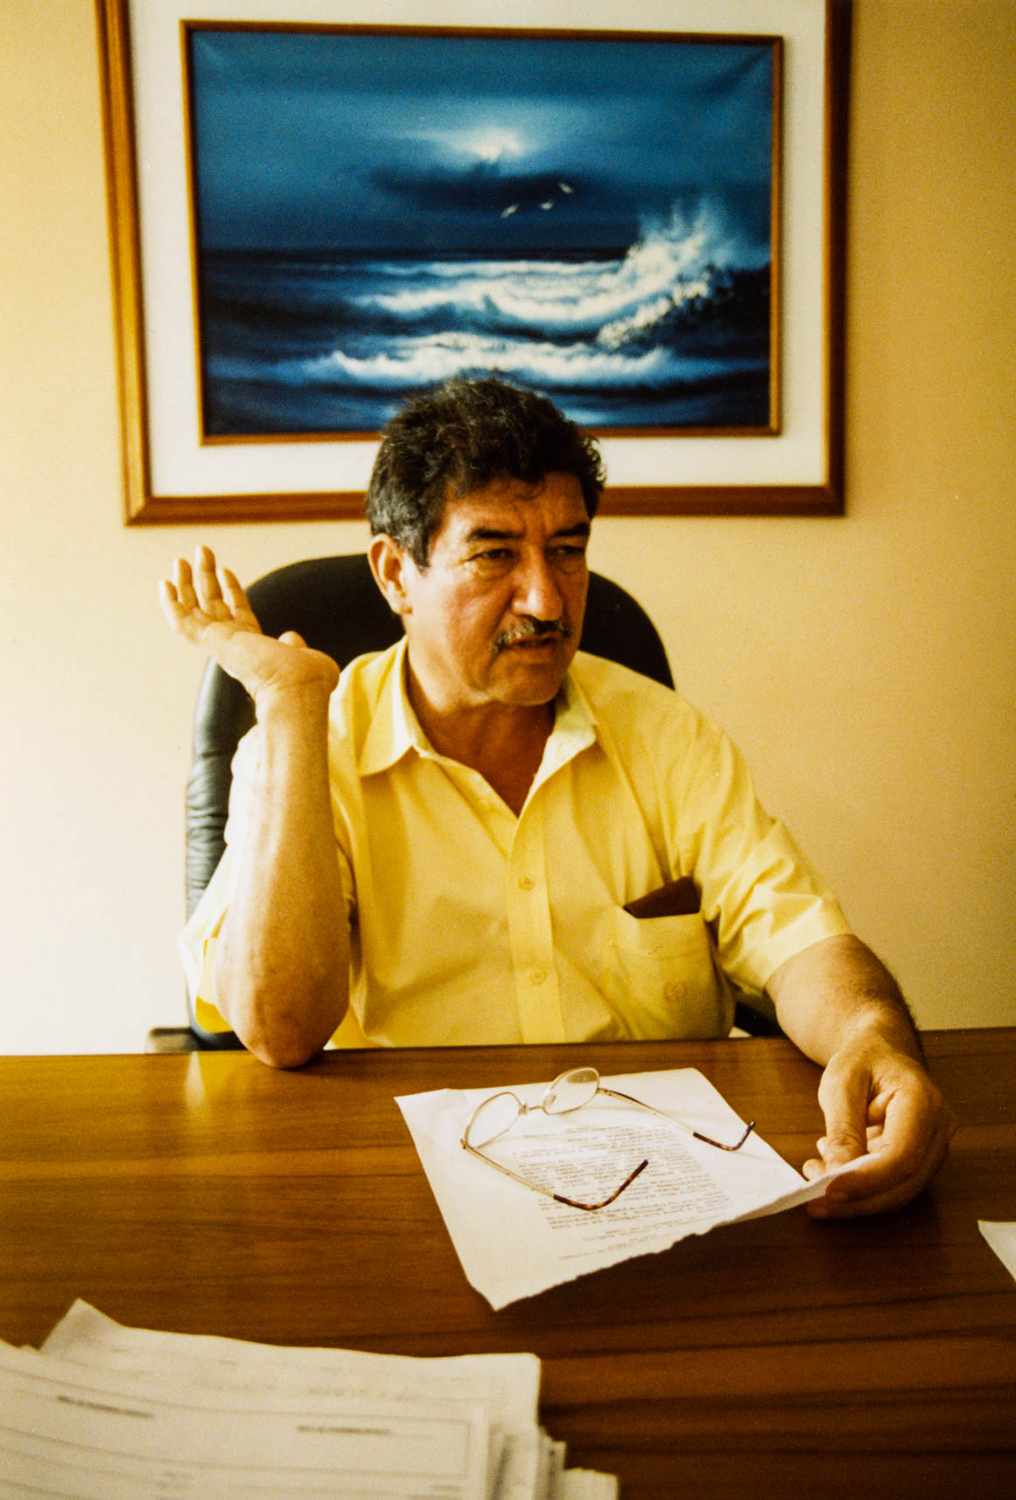 <p>Jorge Bernal was mayor of the rural town of Tame in 2003, when my colleague Garry Leech and I interviewed him about the war engulfing his region. Here he shrugs off a fax from the FARC guerrillas denouncing him as a 'narcoparamilitary'.<br /></p>